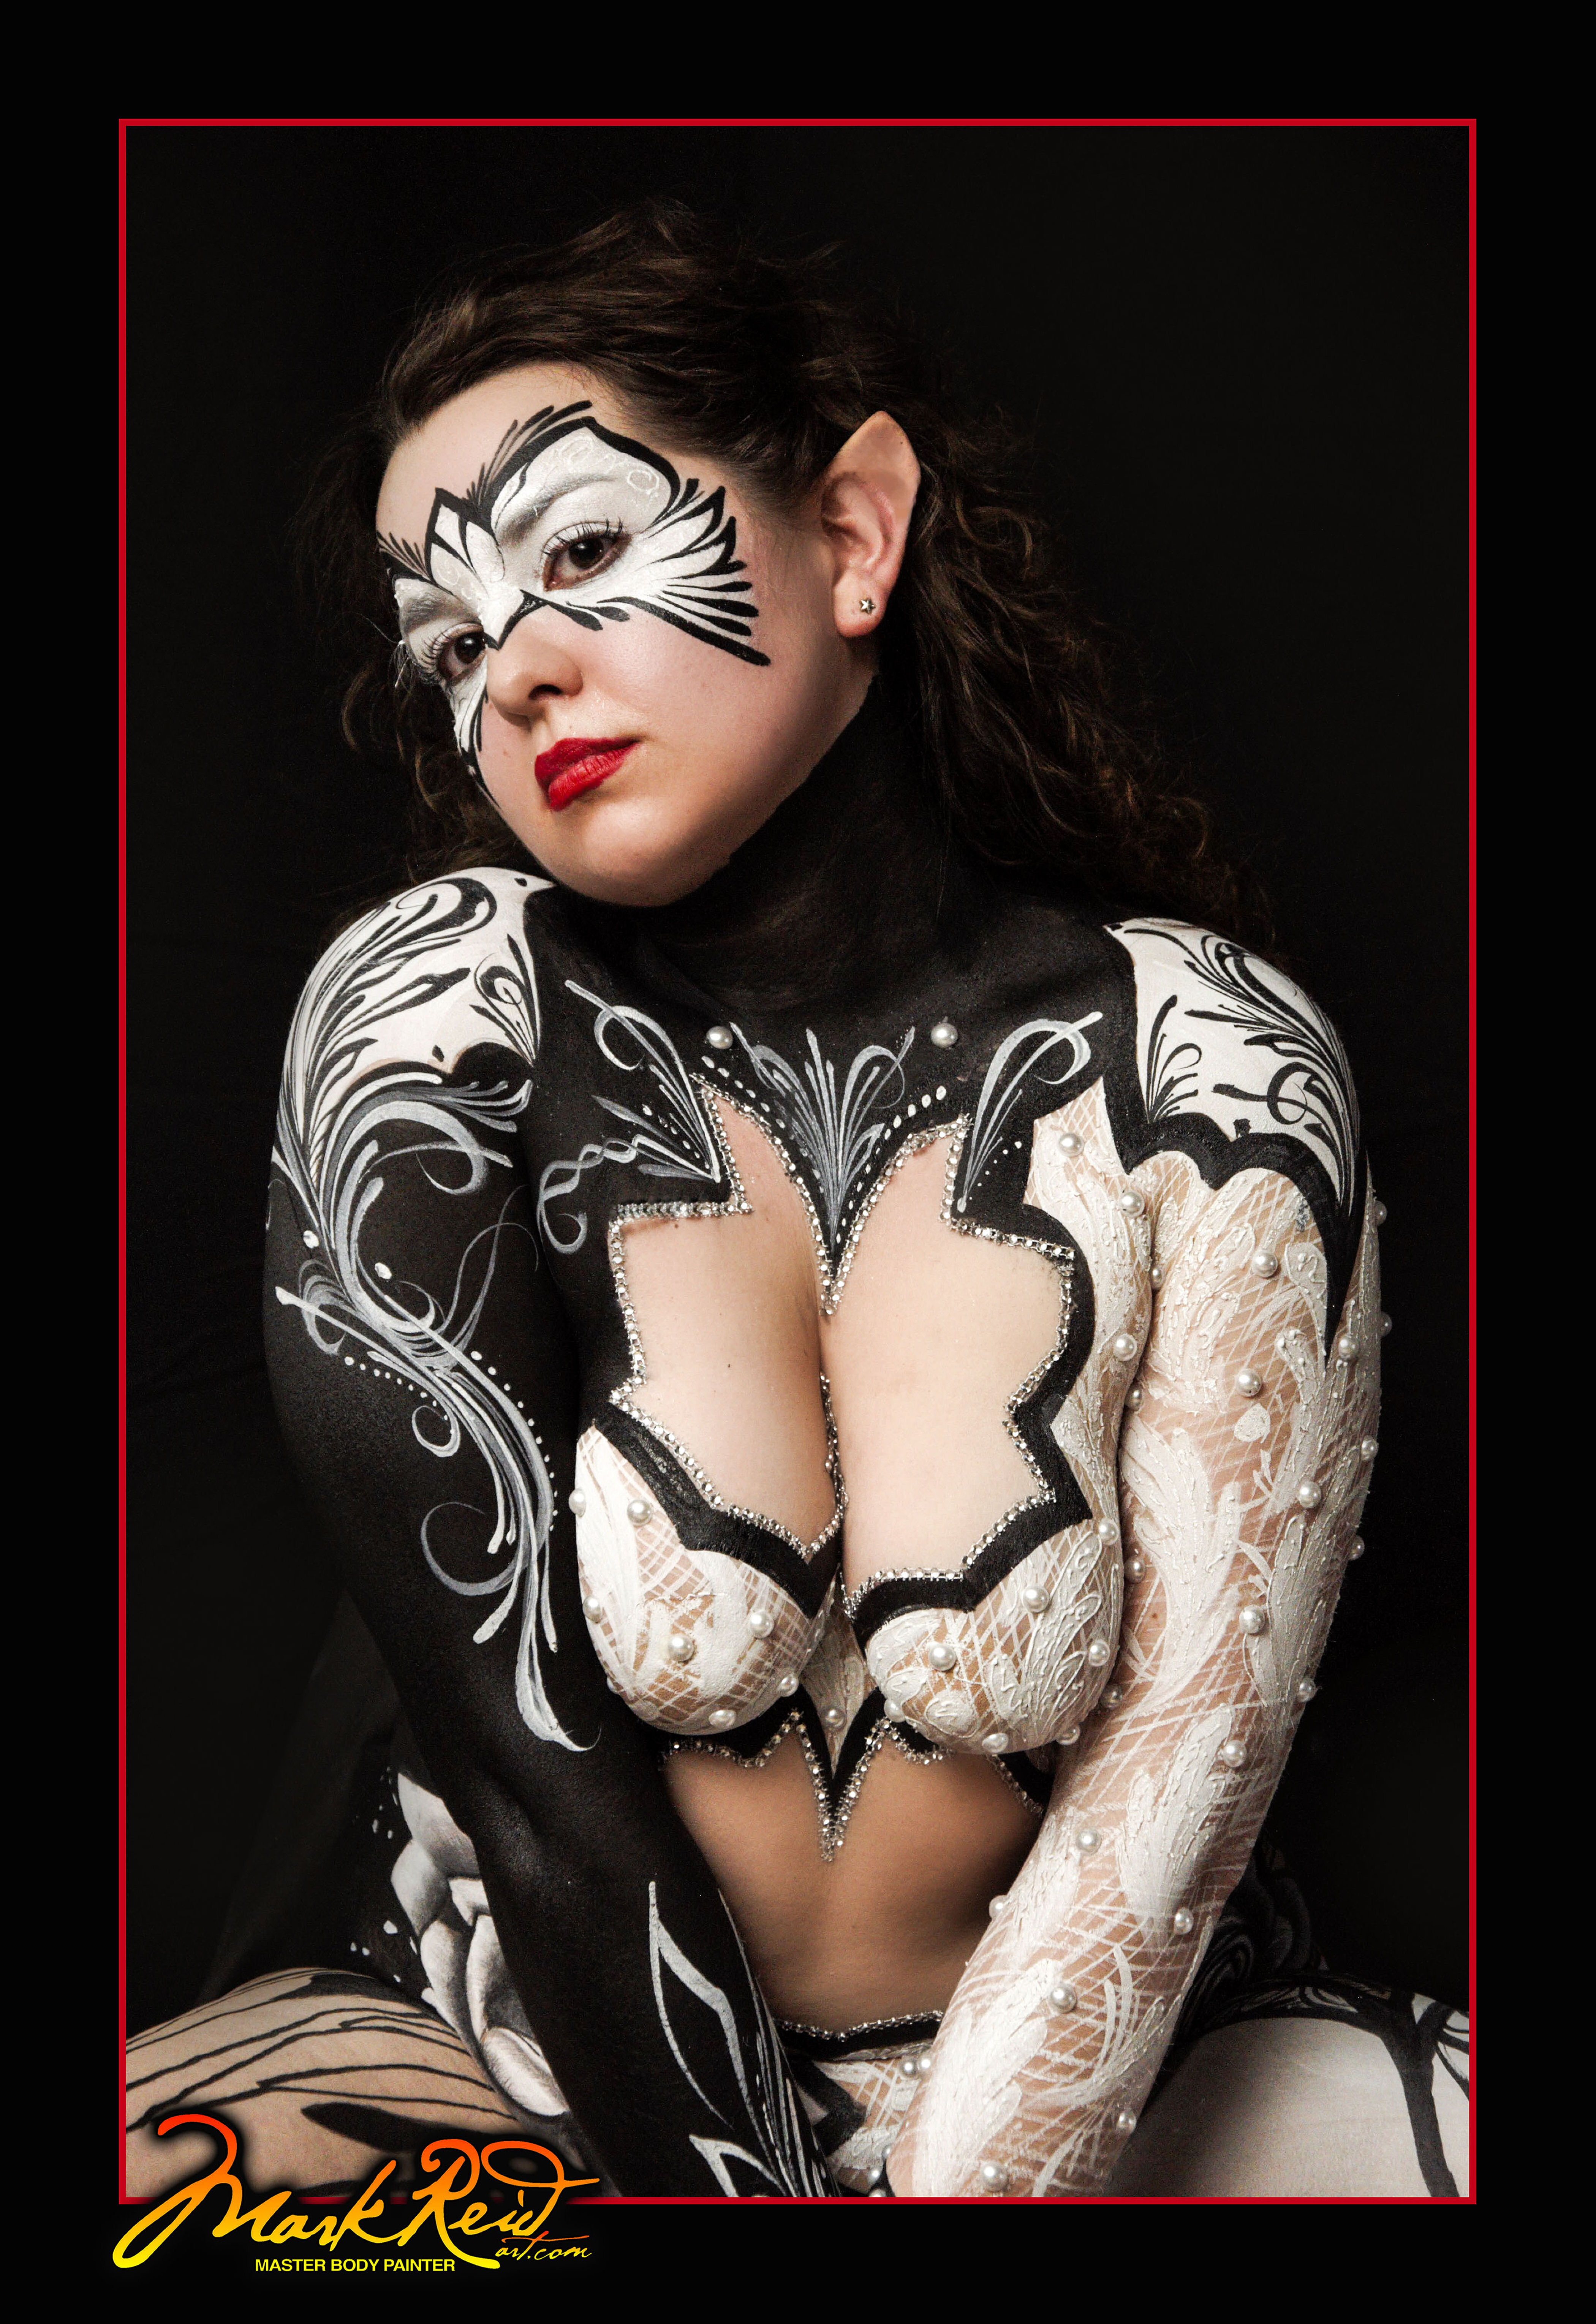 Brunette painted with silver and black body paint